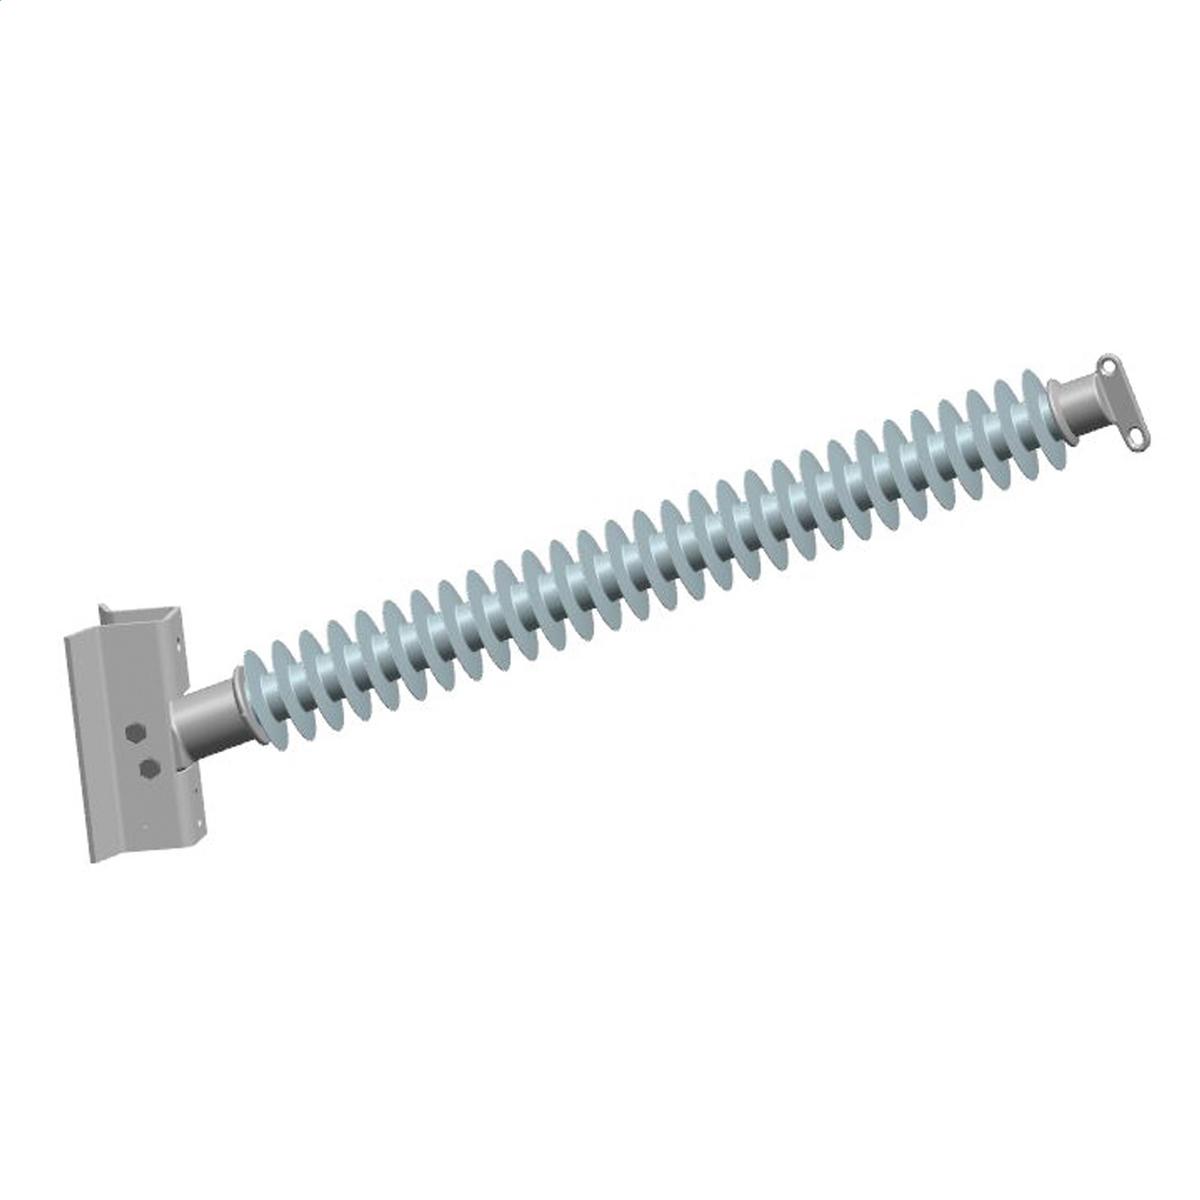 Hubbell P350152S0070 3.5" Line Post, 2 hole blade, Steel gain base 14" CL - 1" bolts  ; Made from hydrophobic silicone polymer ; 